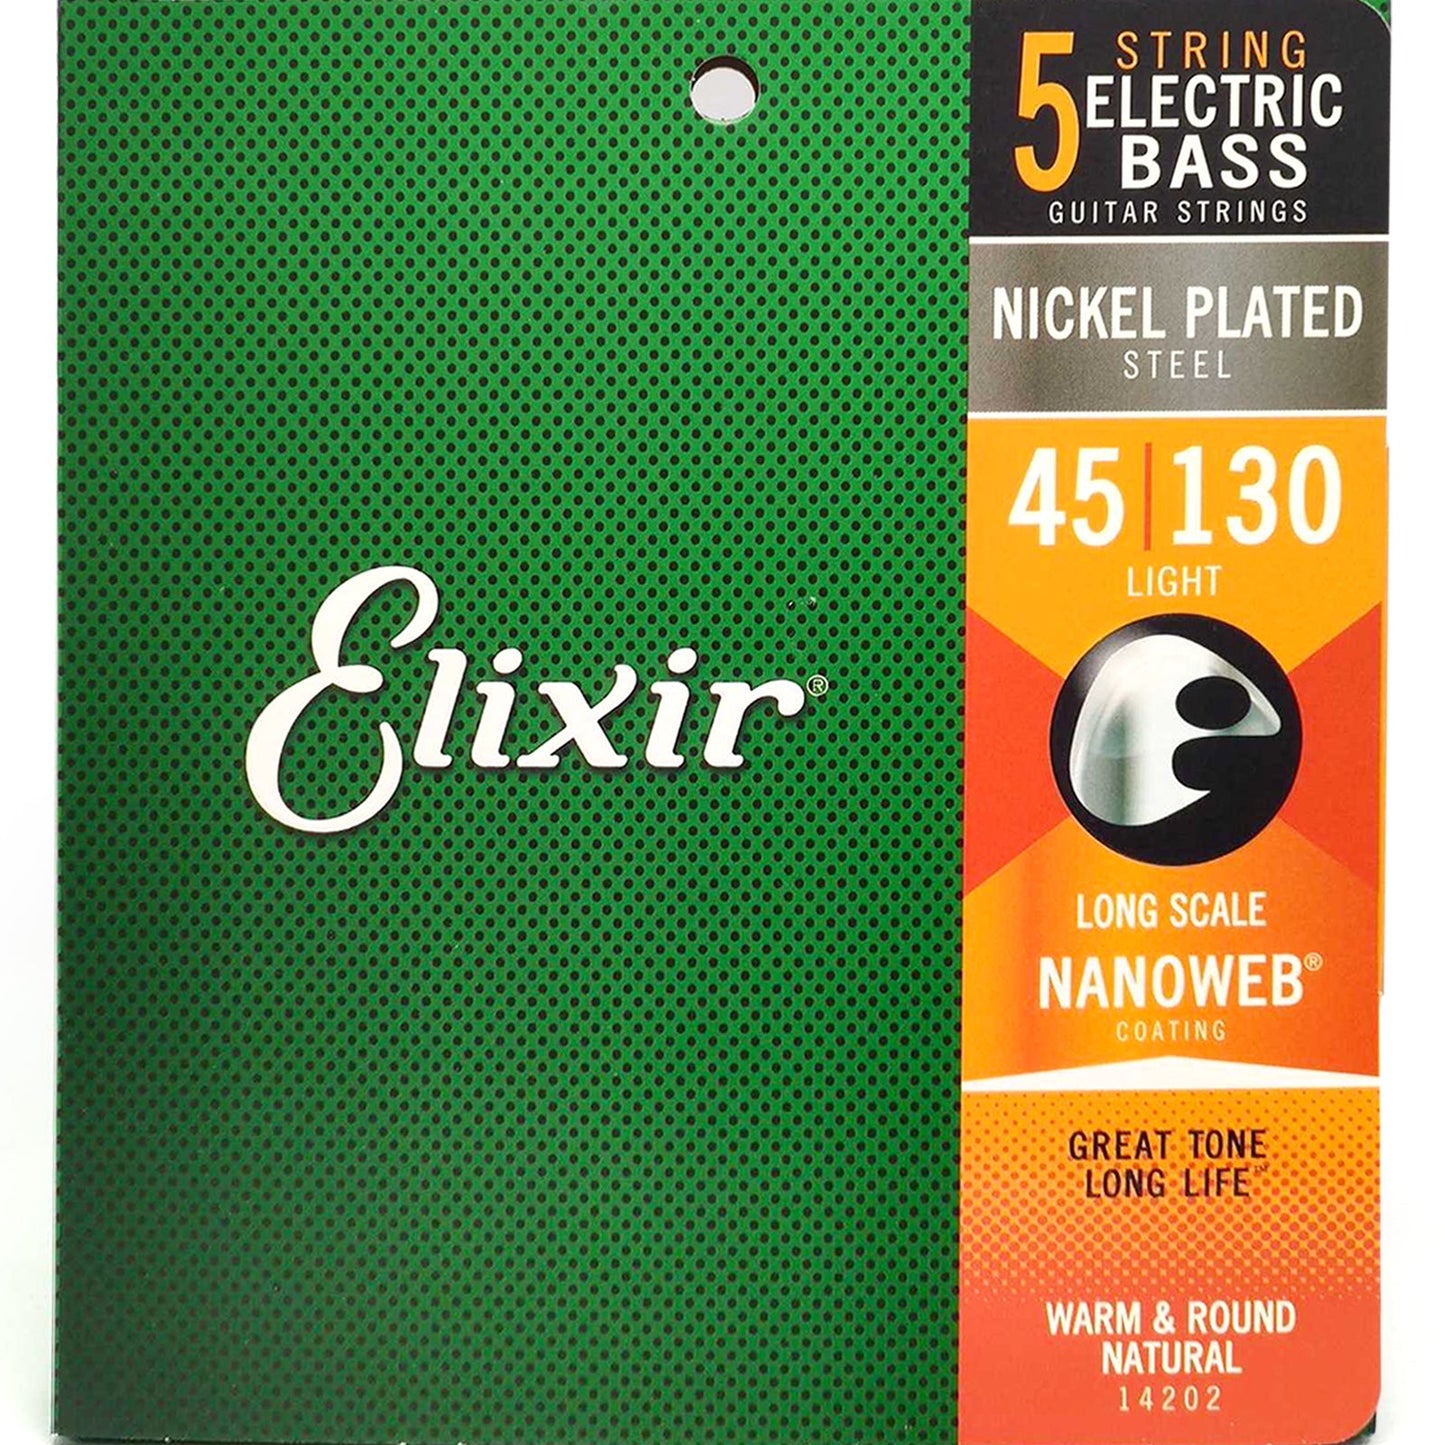 Elixir Electric Bass 5-String Nickel Plated Steel Bass Guitar Strings with NANOWEB Coating